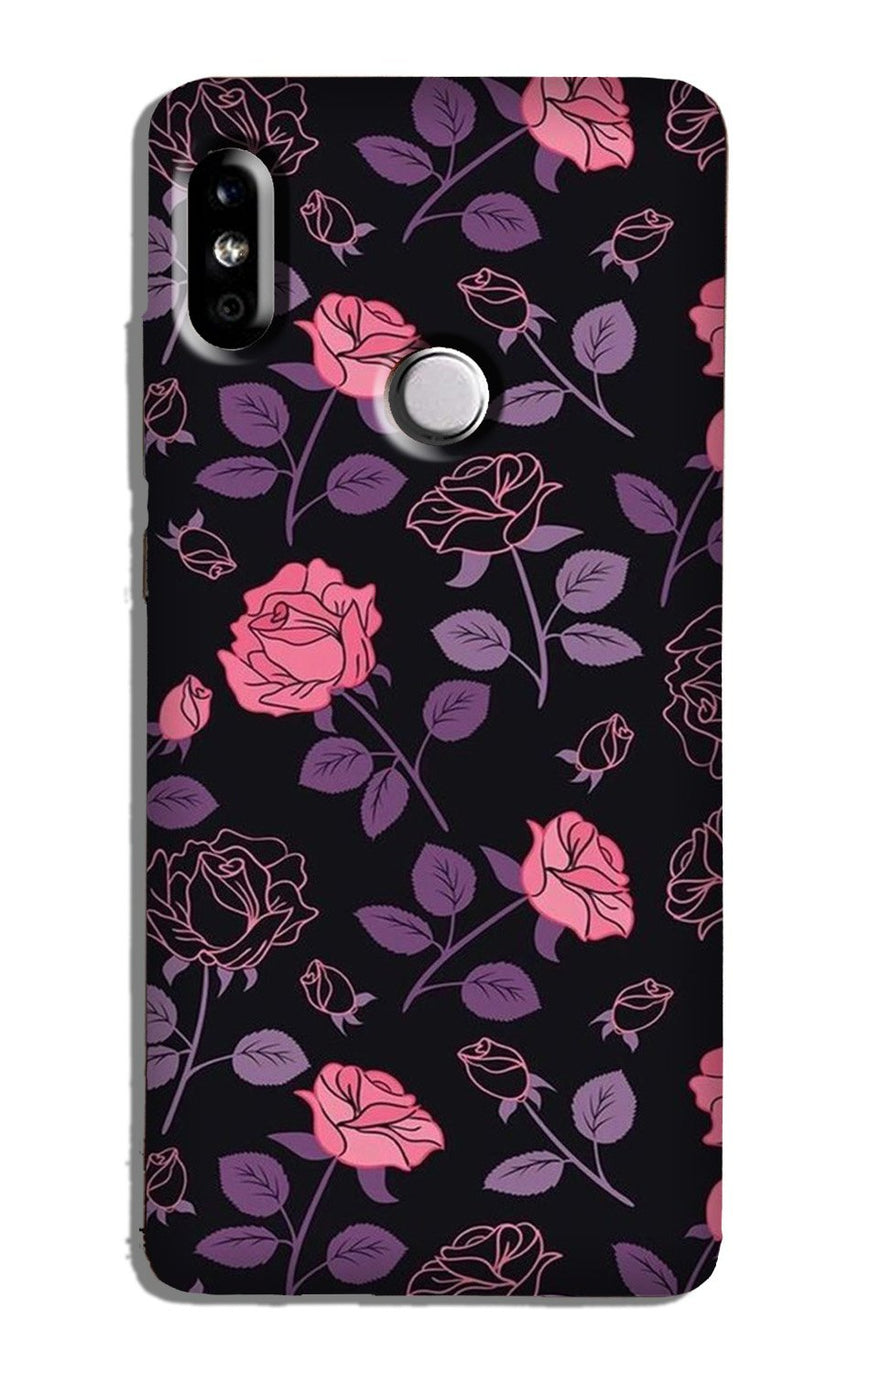 Rose Pattern Case for Redmi Note 5 Pro